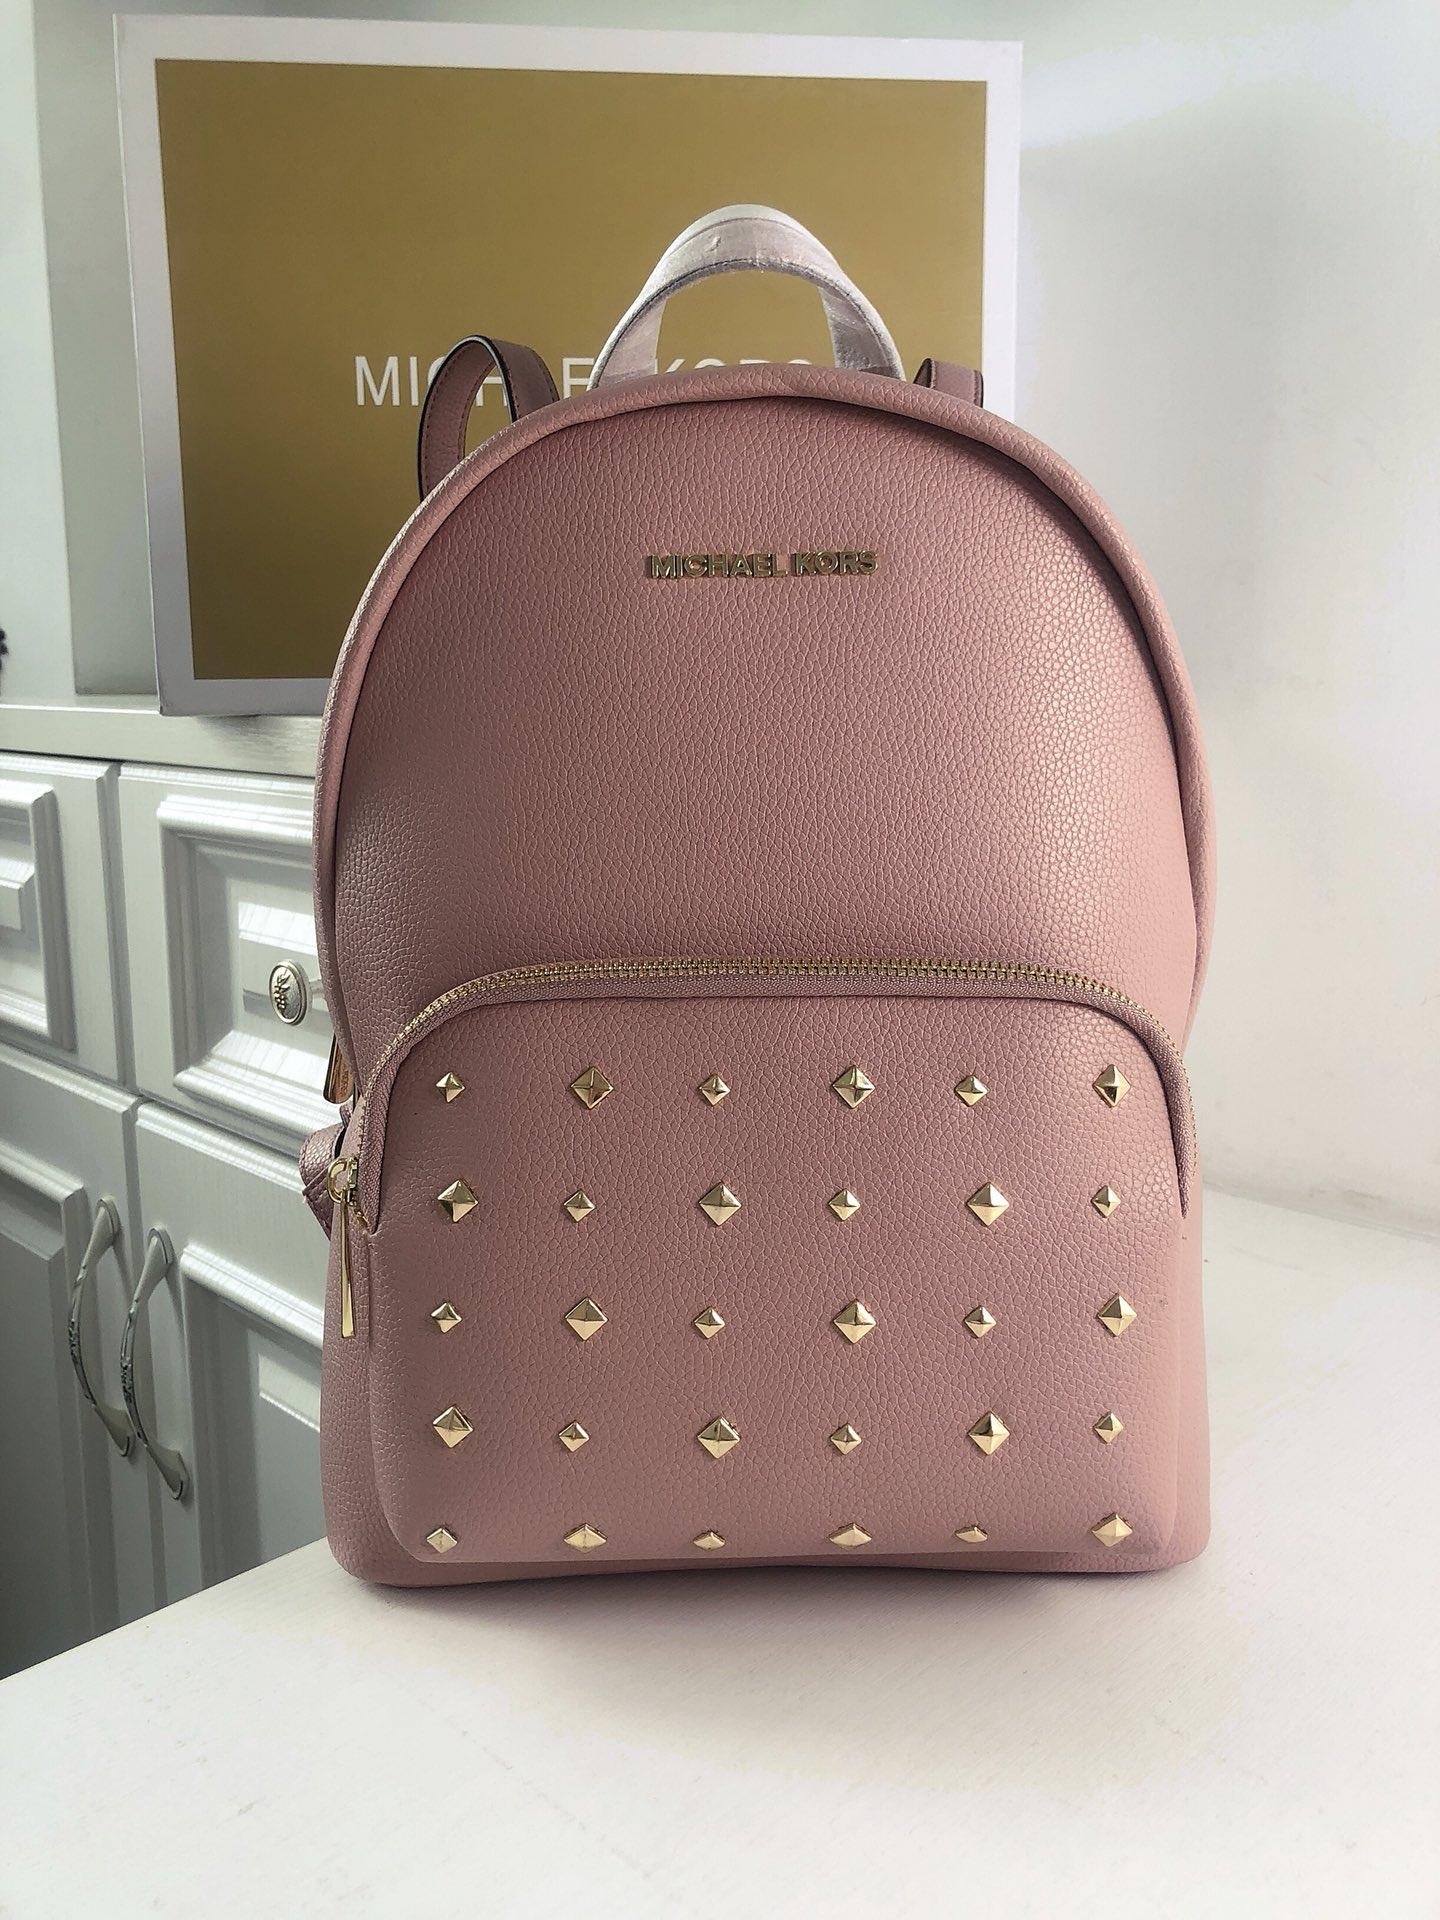 Michael Kors ABBEY LEATHER Studded BACKPACK